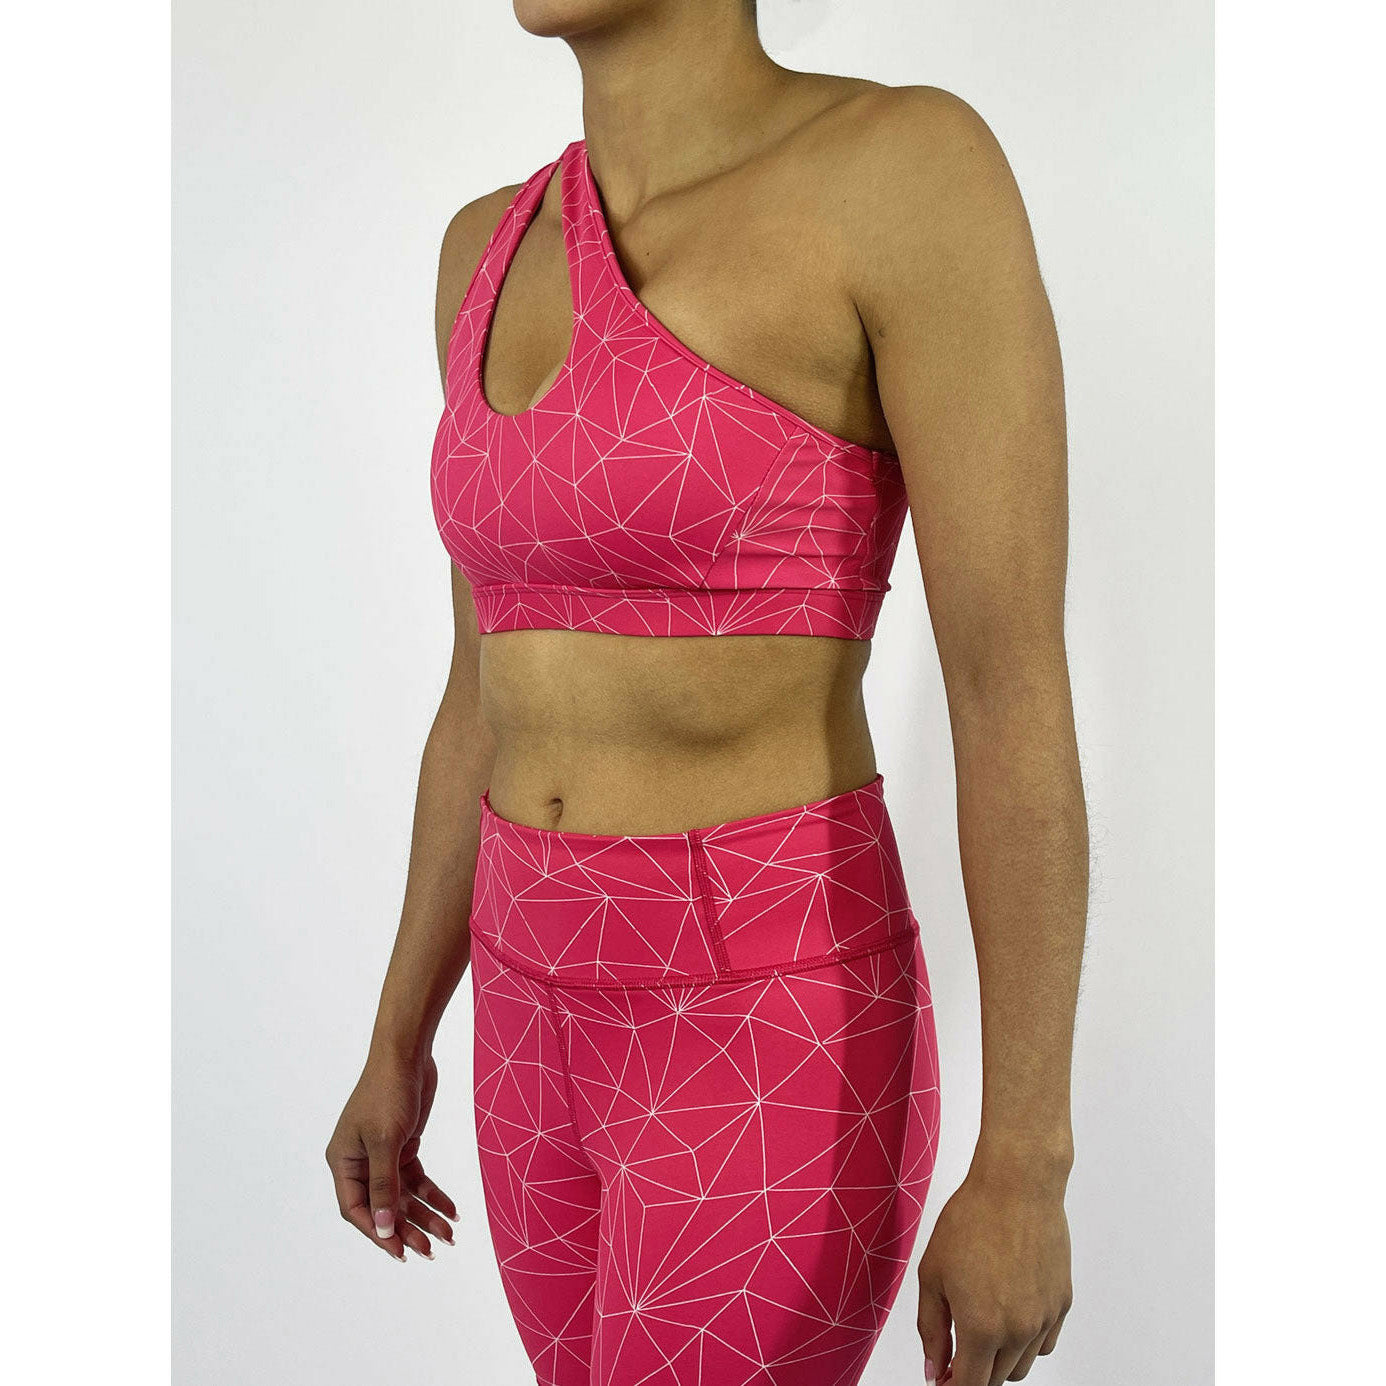 One Shoulder Cut Out Custom Fit Pink Lines Sports Bra – Athlettia